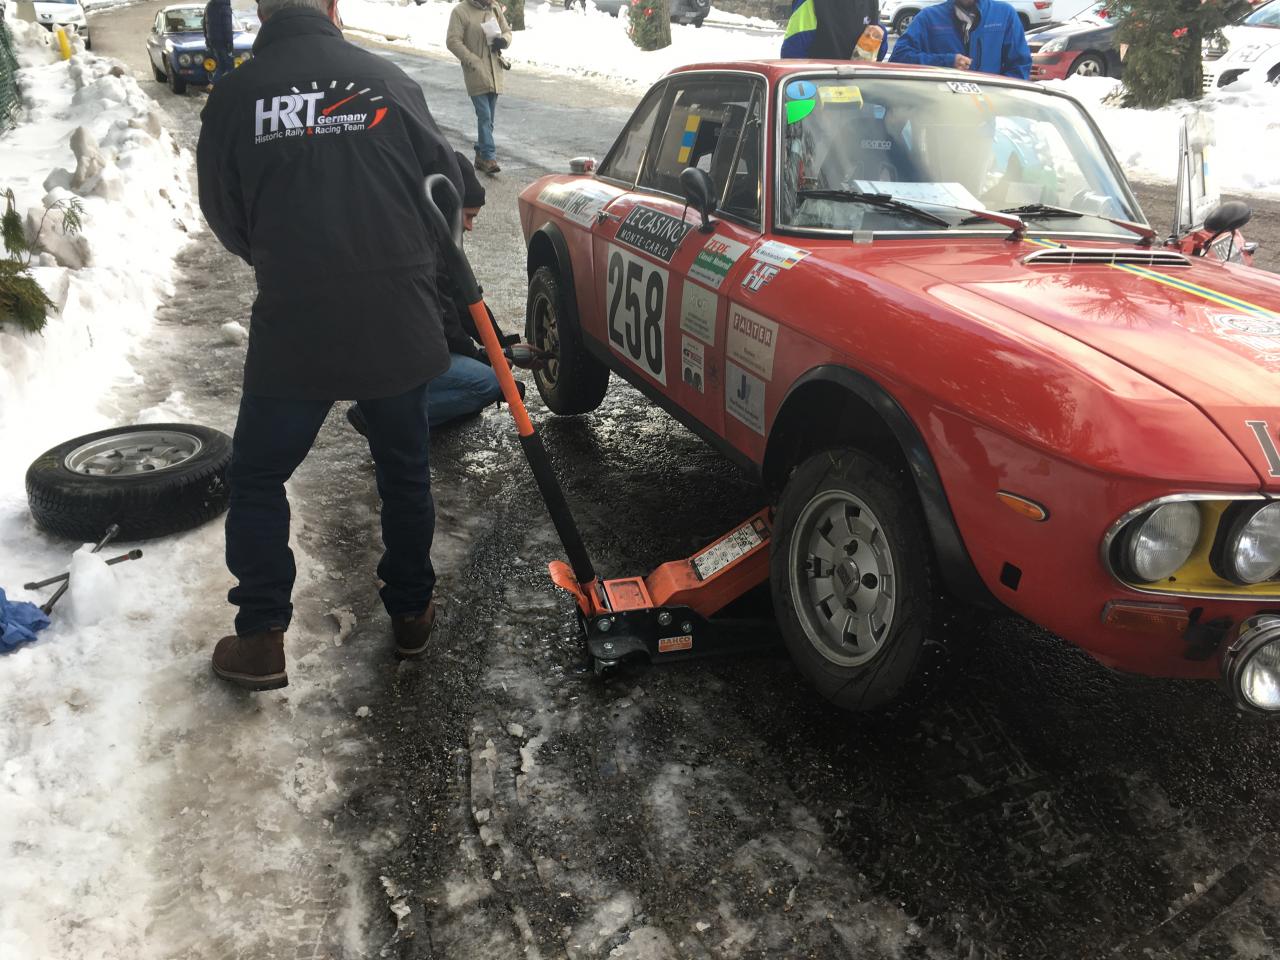 Service in St. Agrève - changing tyres